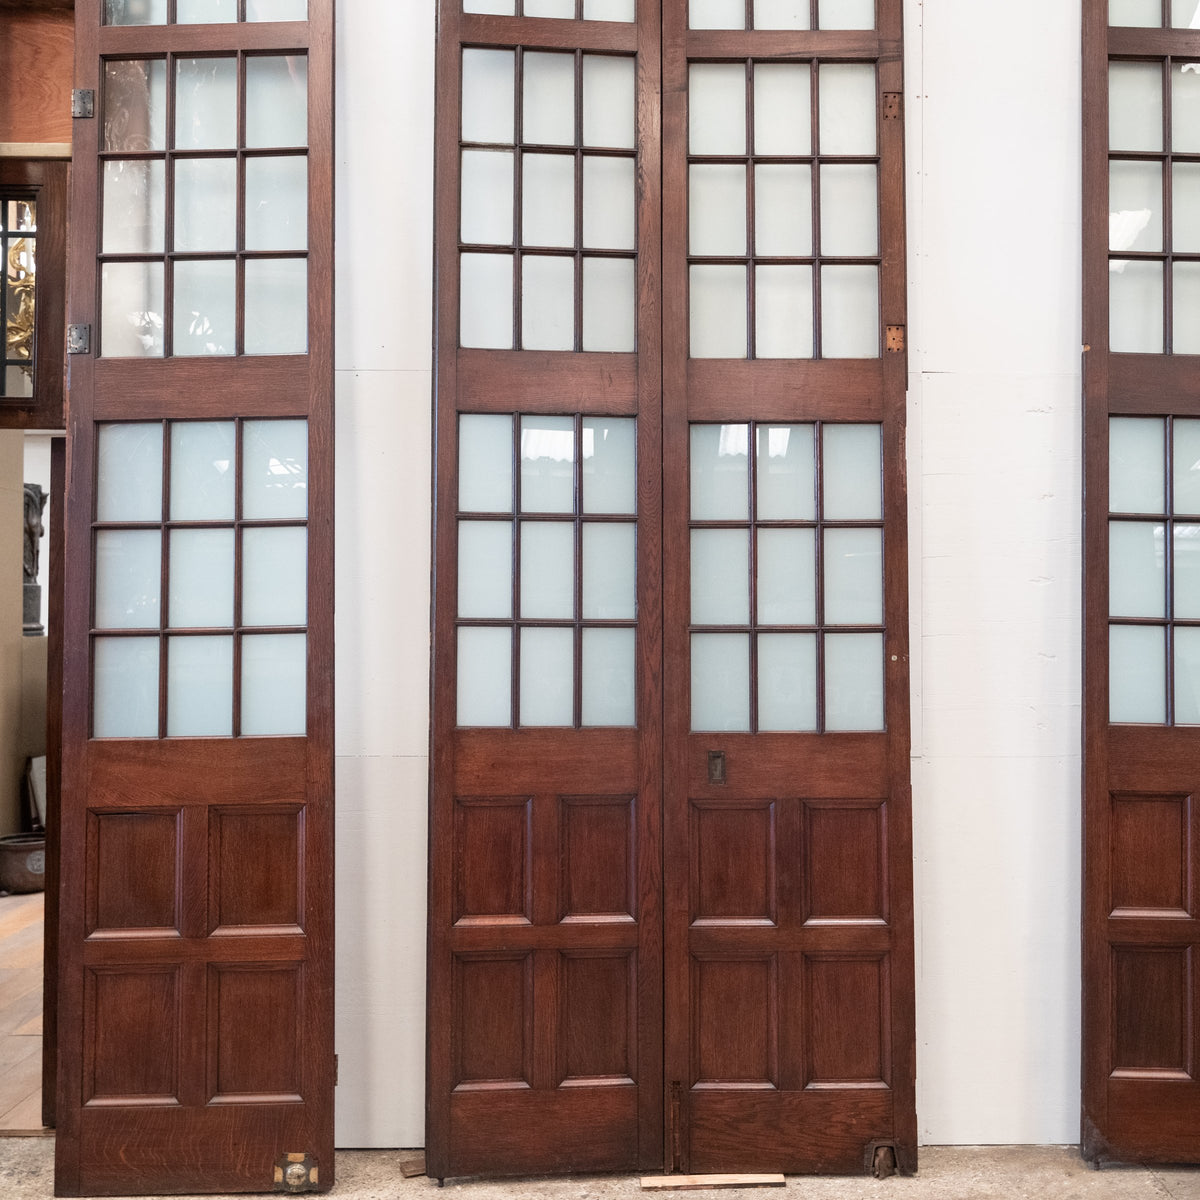 Extra Tall Oak Room Dividers | Antique Glazed Partition Panels (6m) | The Architectural Forum